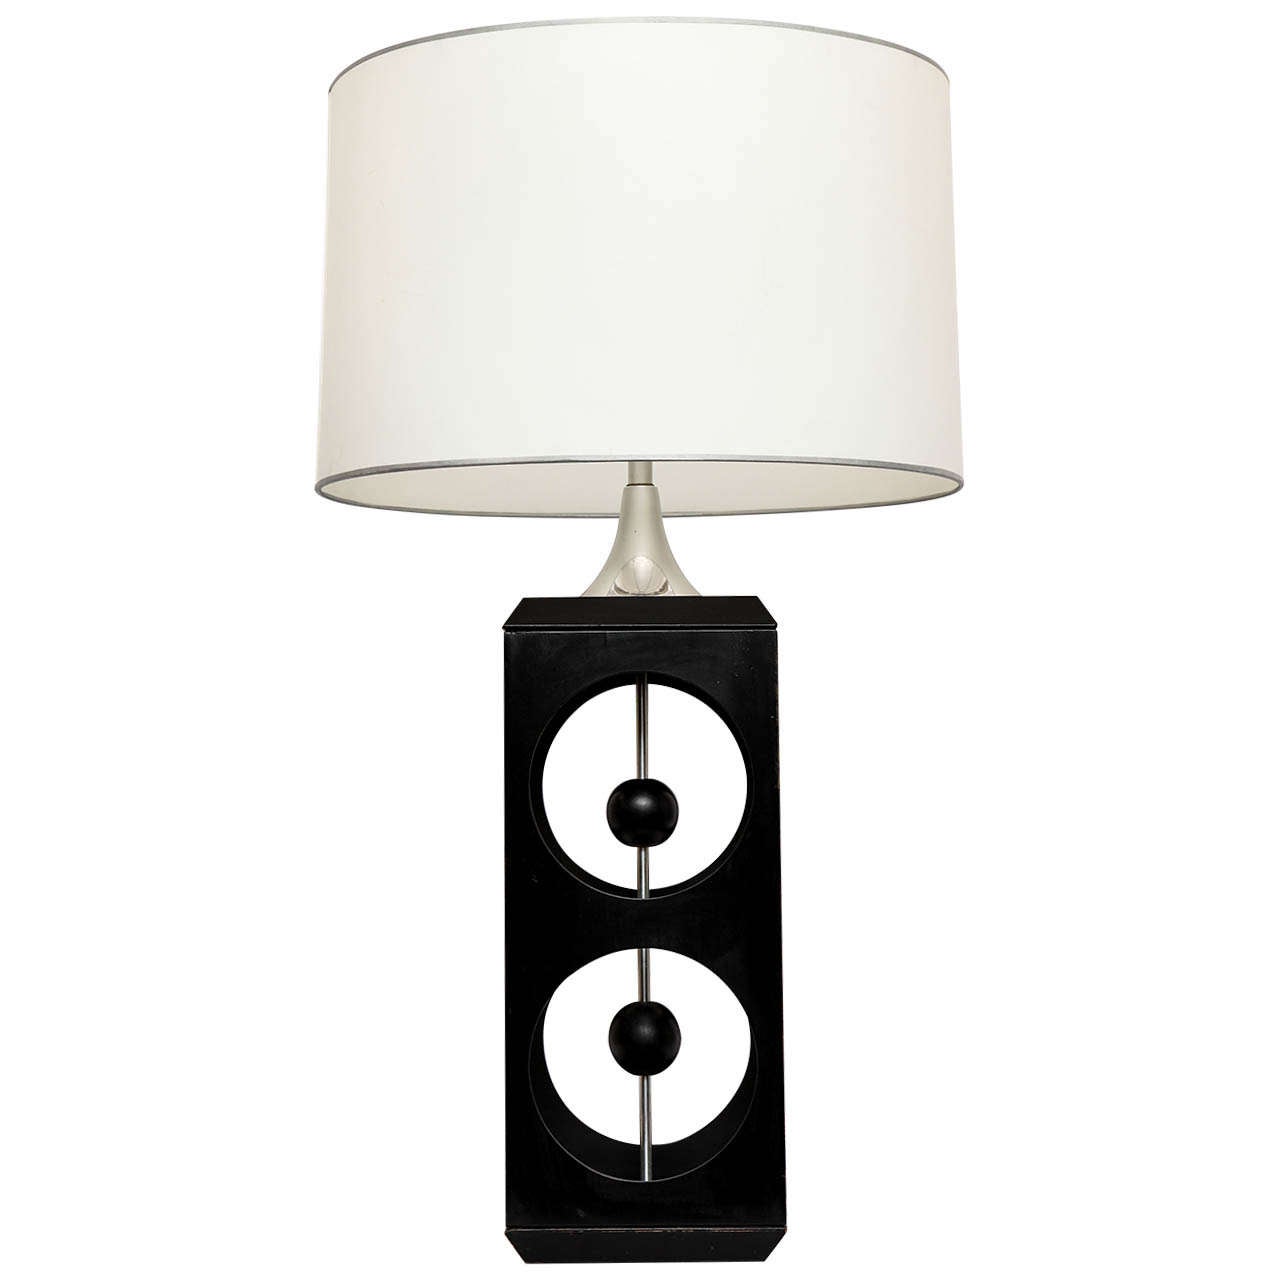  Modeline Table Lamp Mid Century Modern Architectural  1960's For Sale